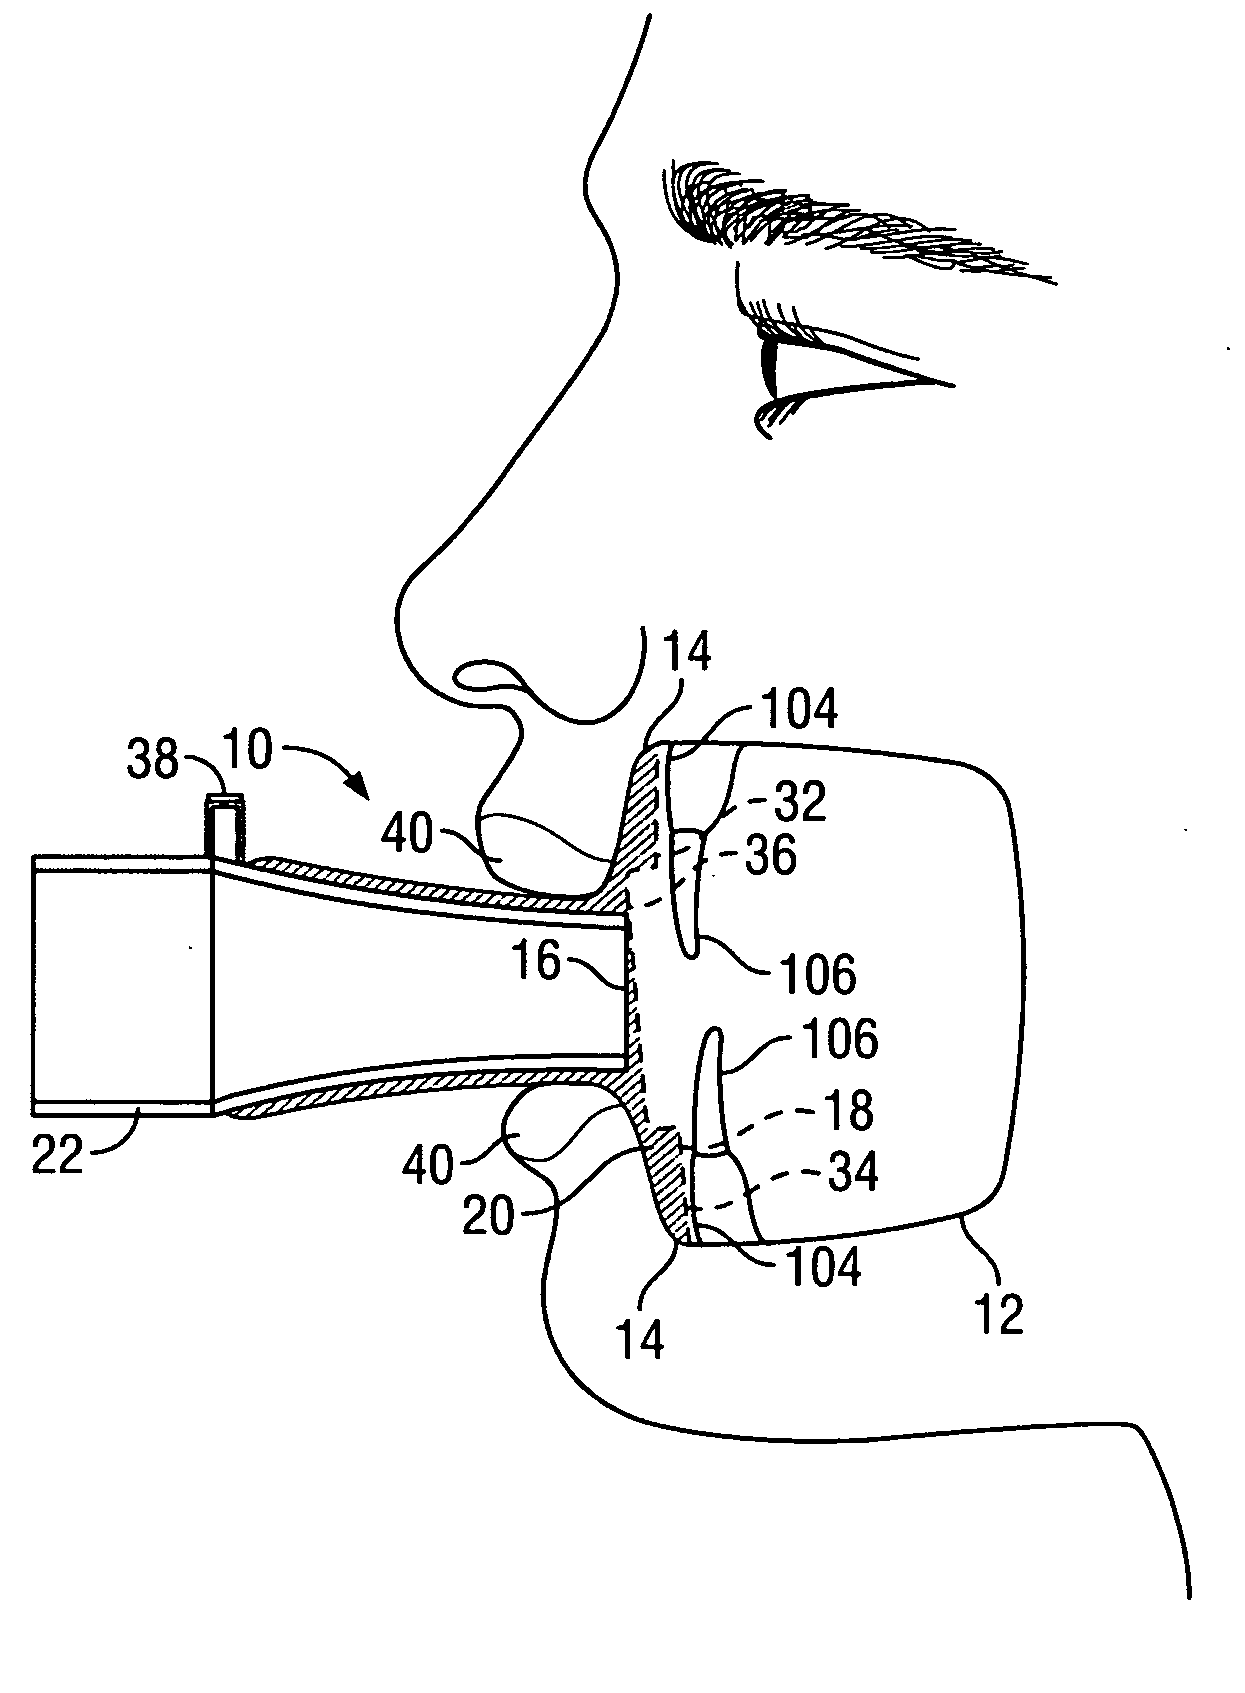 Respiratory mask having intraoral mouthpiece with large sealing area and multiple sealing configuration